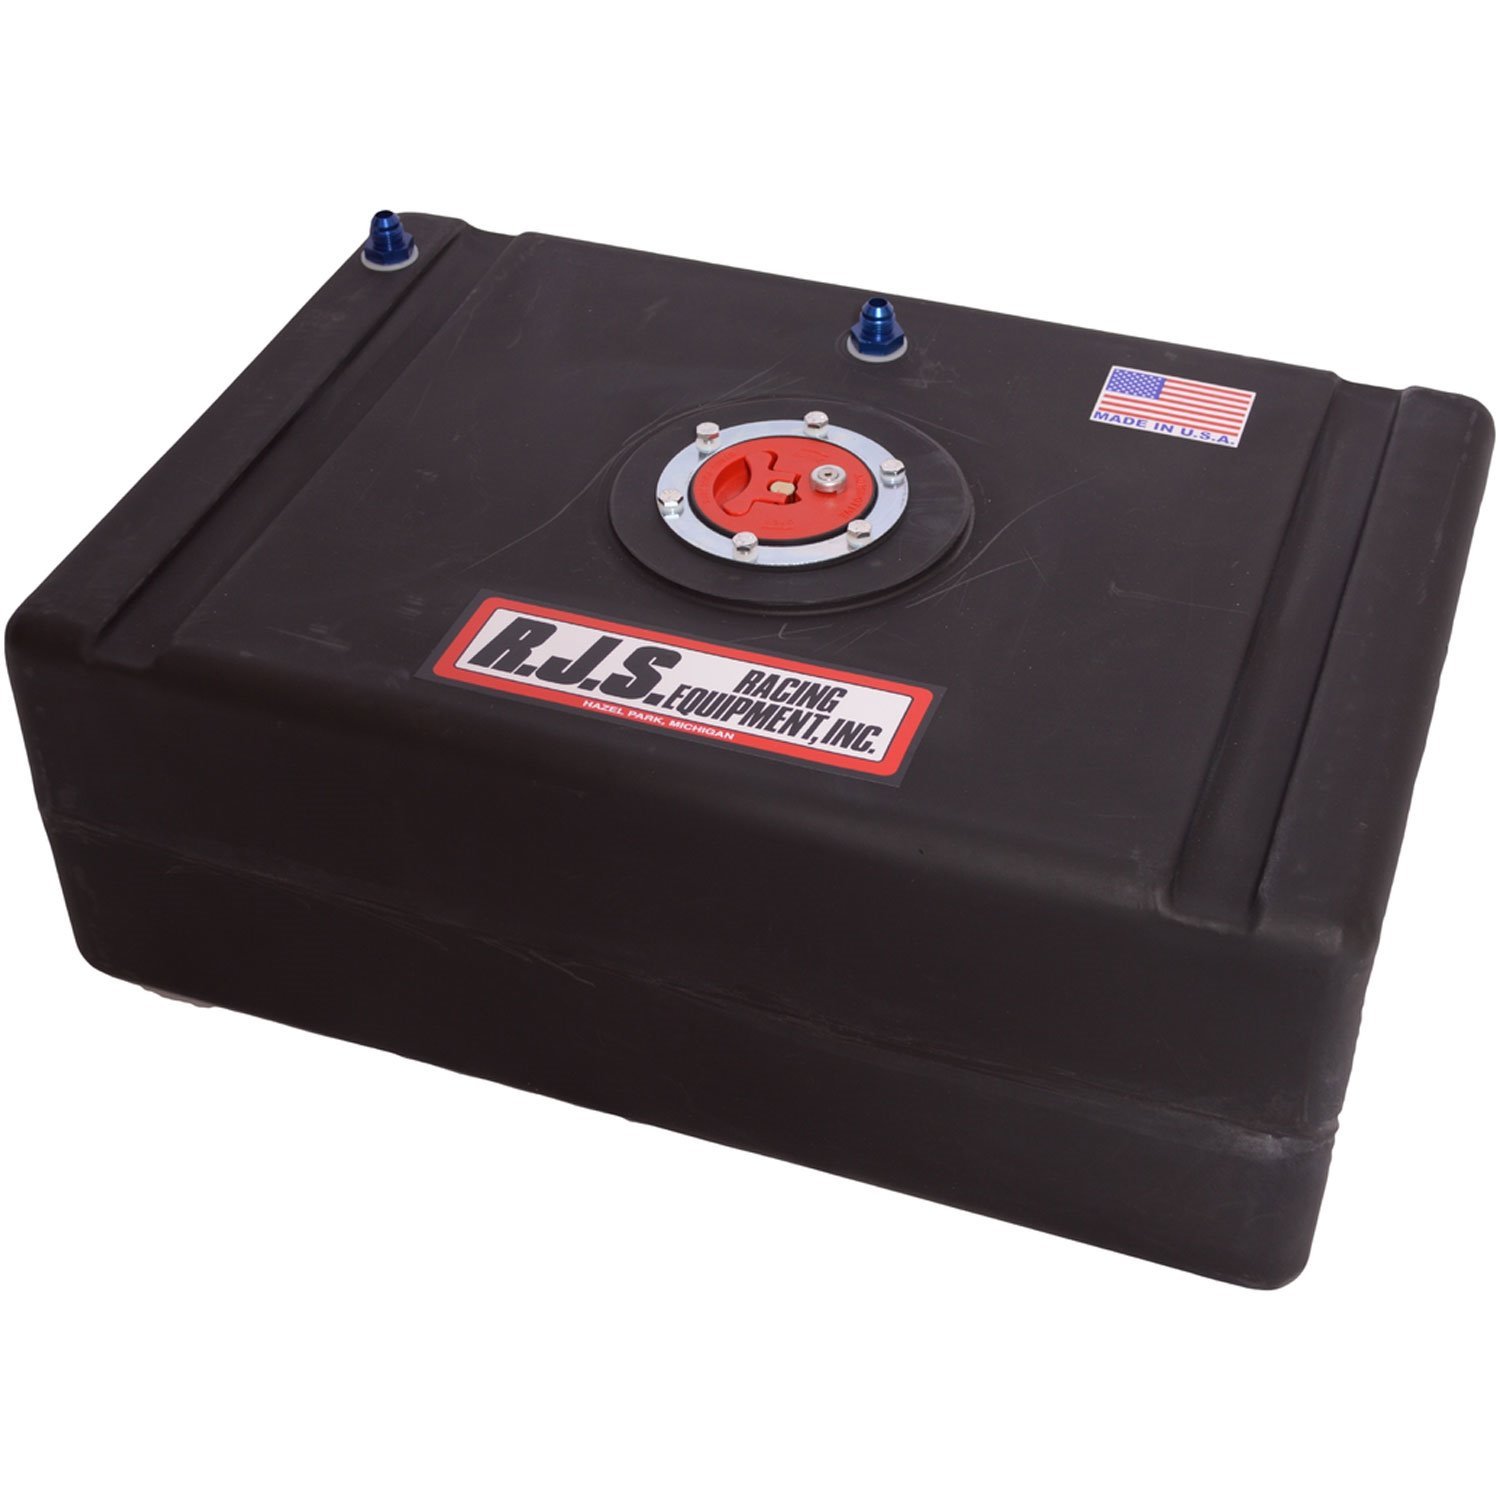 15 Gallon Economy Fuel Cell with Aircraft Style Cap